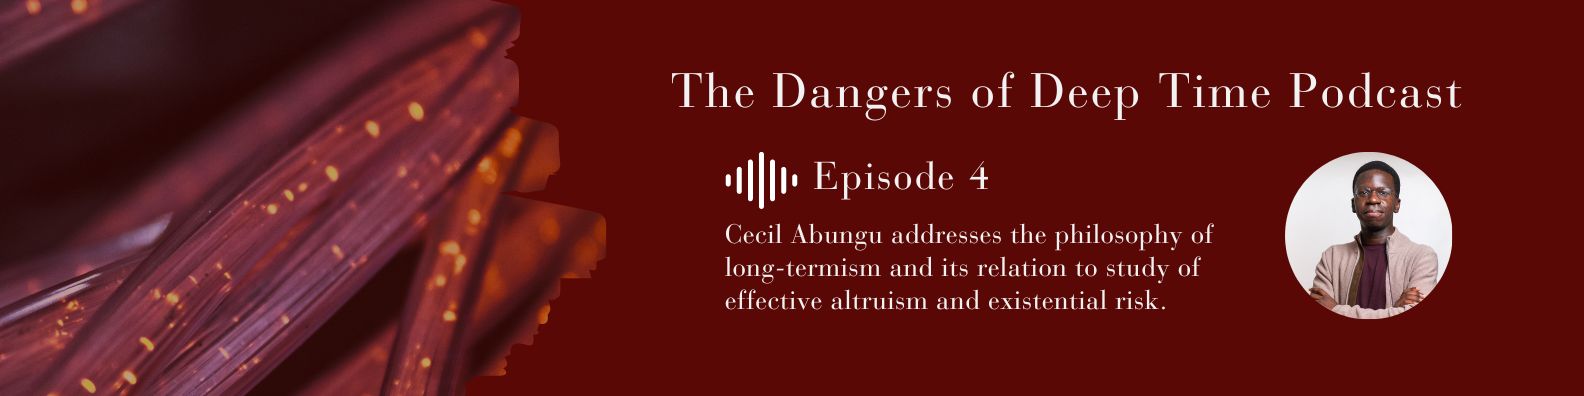 Dangers of Deep Time Podcast Episode 4 Abungu